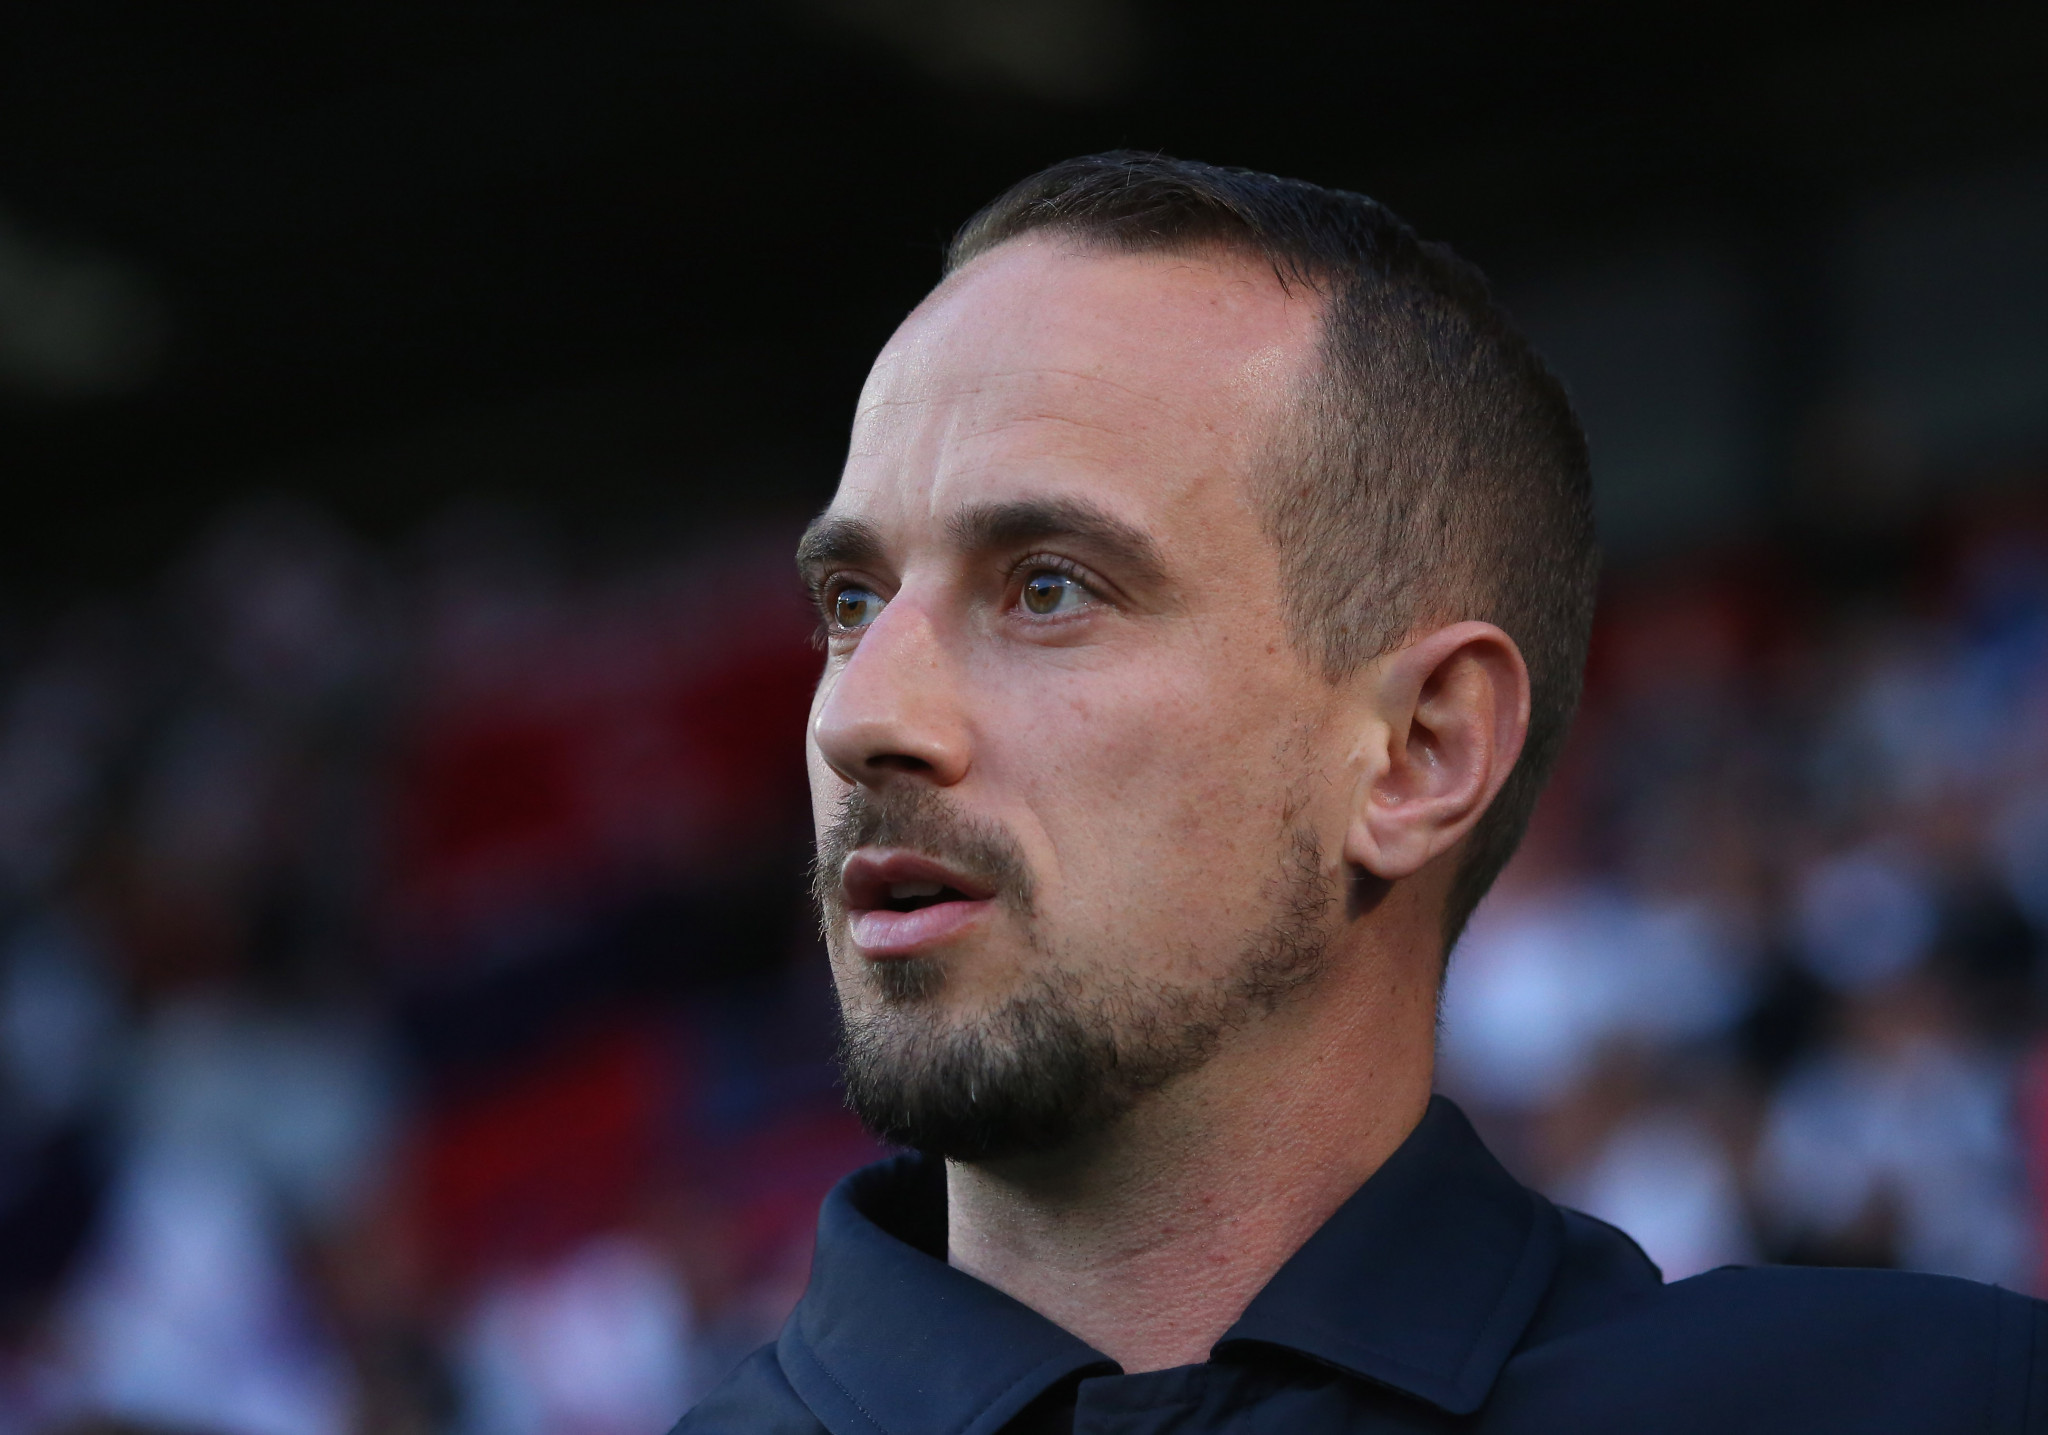 The FA will face questions from parliamentarians about its handling of the case of Mark Sampson, who was sacked as manager of the England women's team ©Getty Images